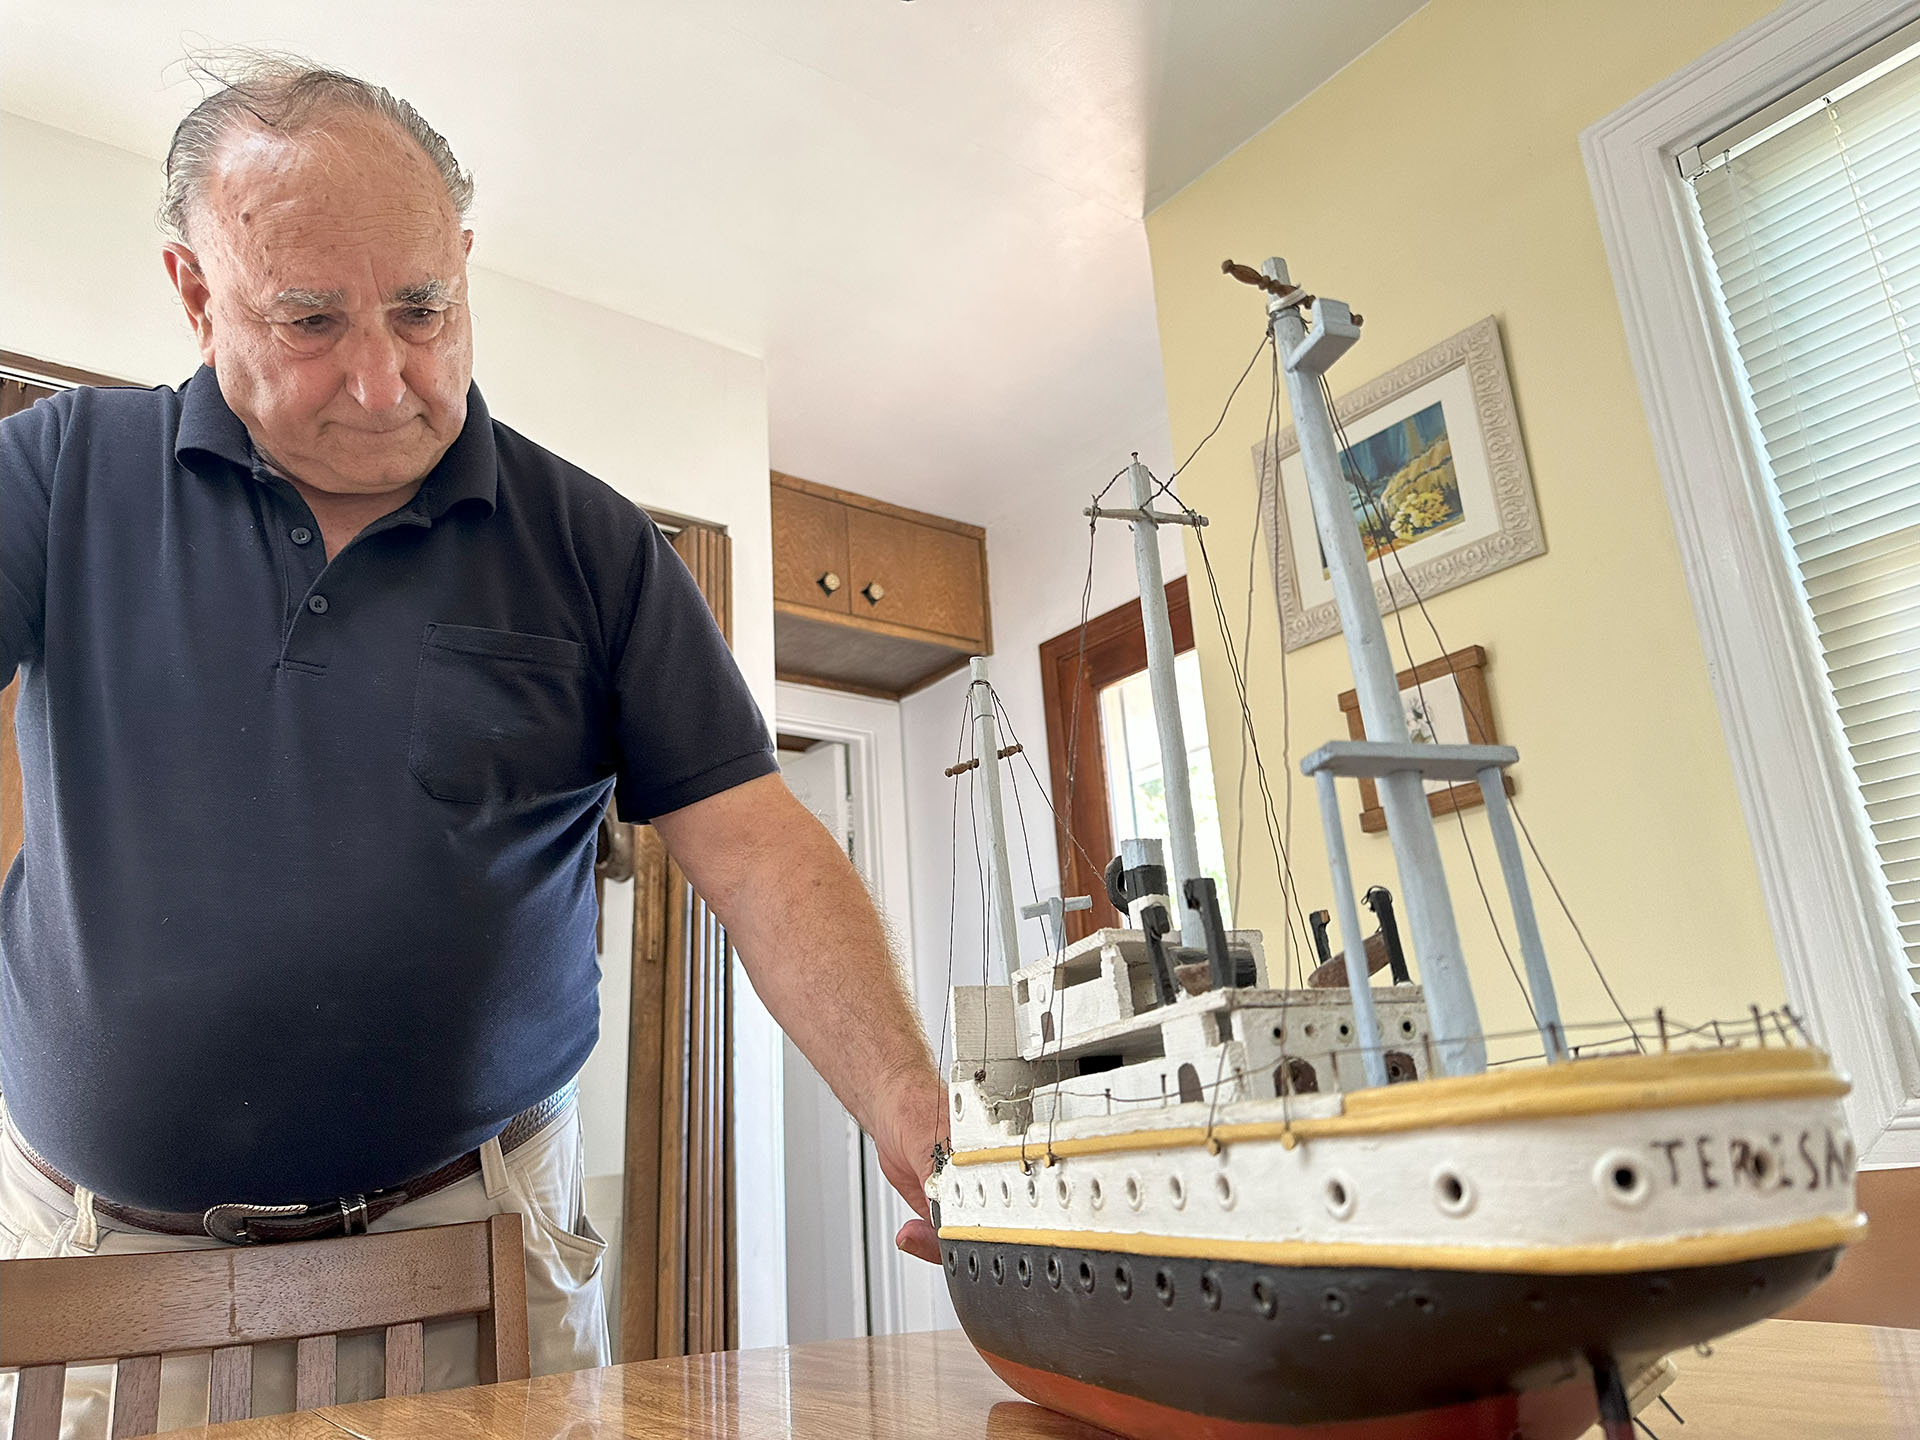 A man looks at a model boat on a kitchen table.